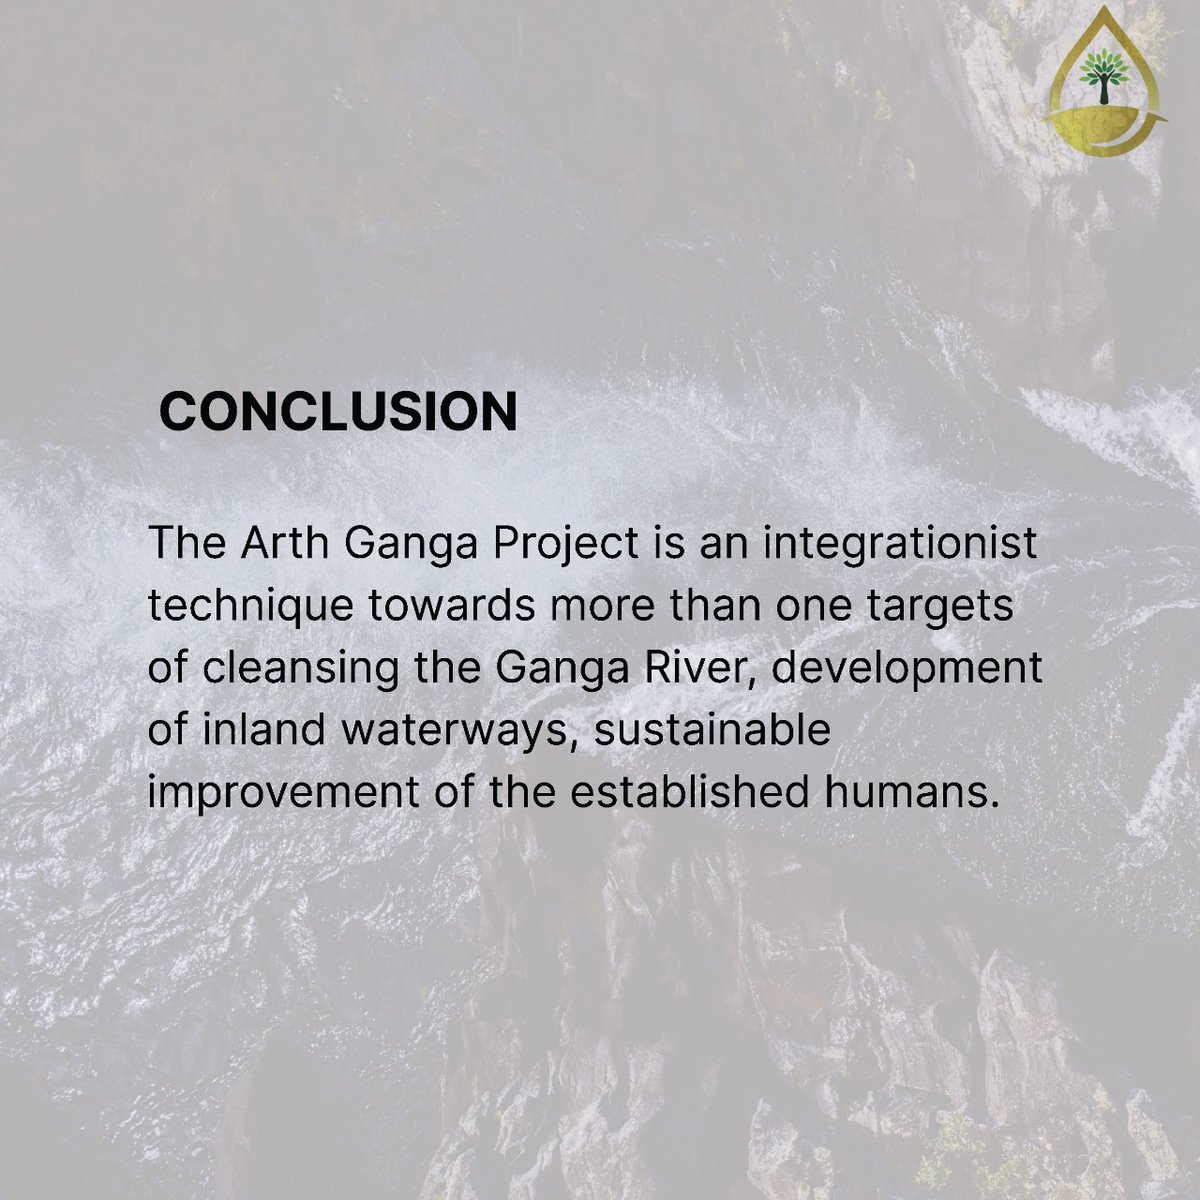 A new model for sustainable development of Water: ' ARTH GANGA '

#ArthGanga
#Waterdevelopment
#GANGA
#Water
#arthganga
#sustainability
#ChamelaHelpdiaTrust